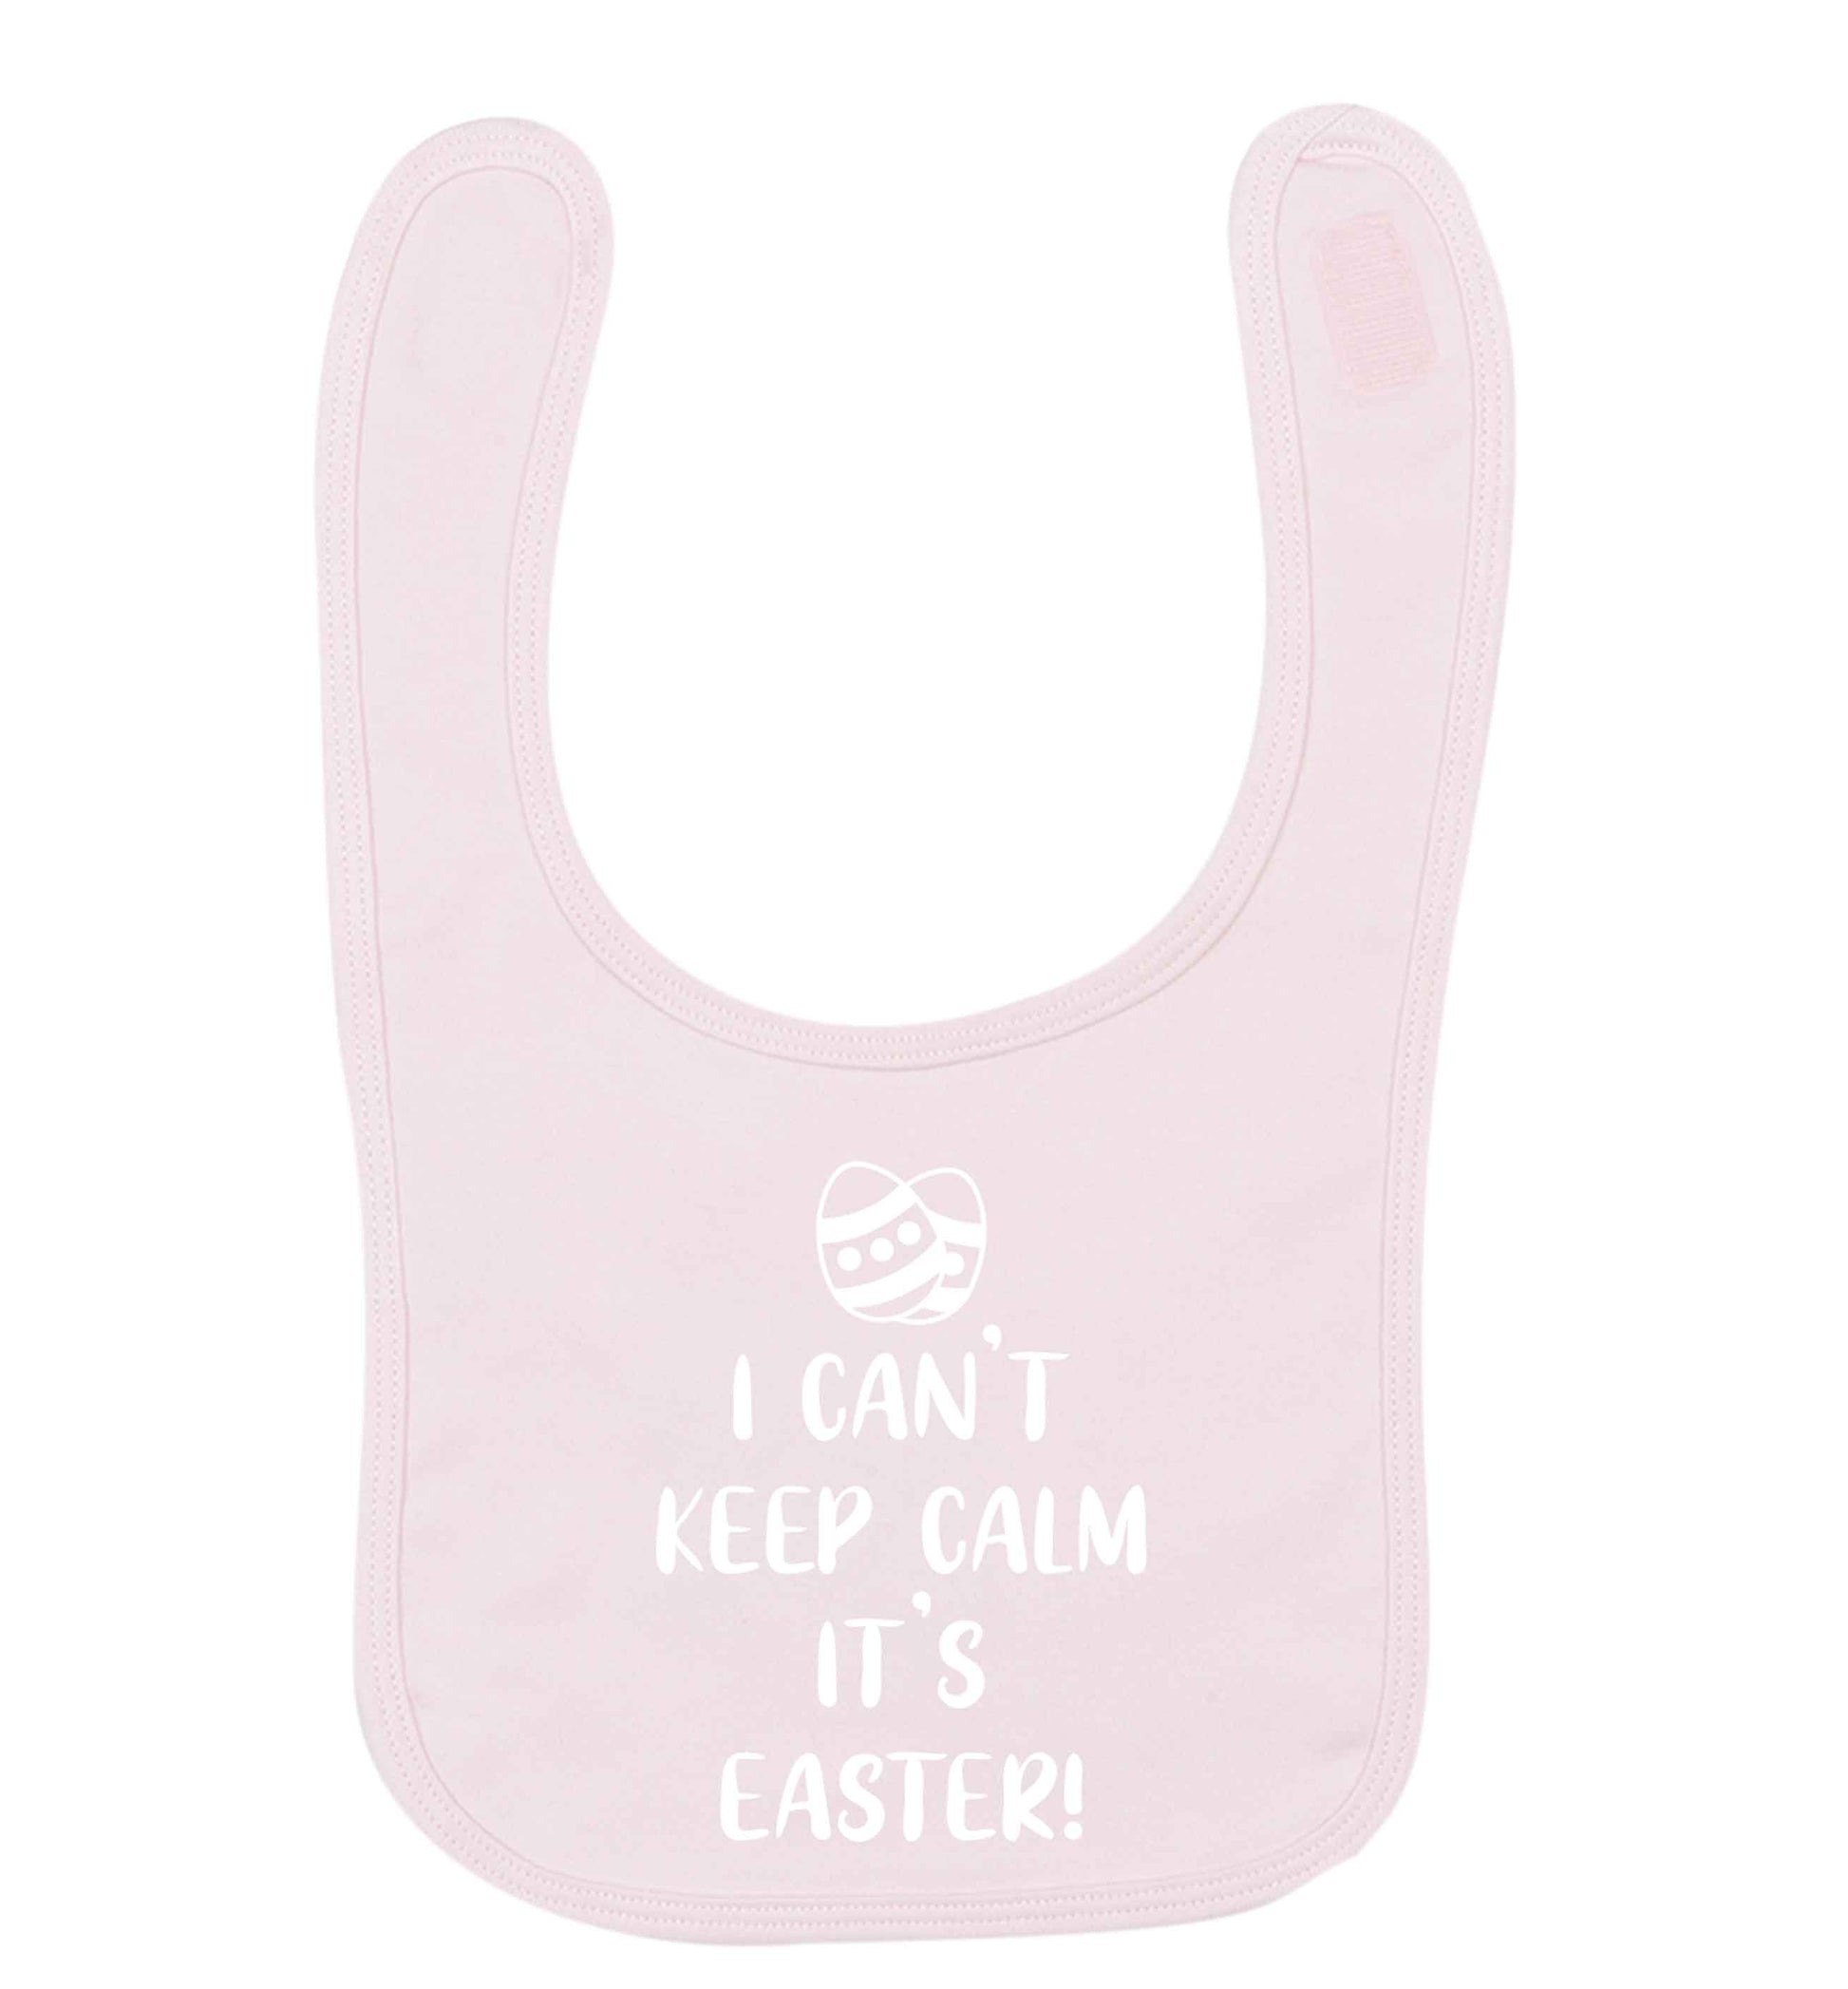 I can't keep calm it's Easter pale pink baby bib